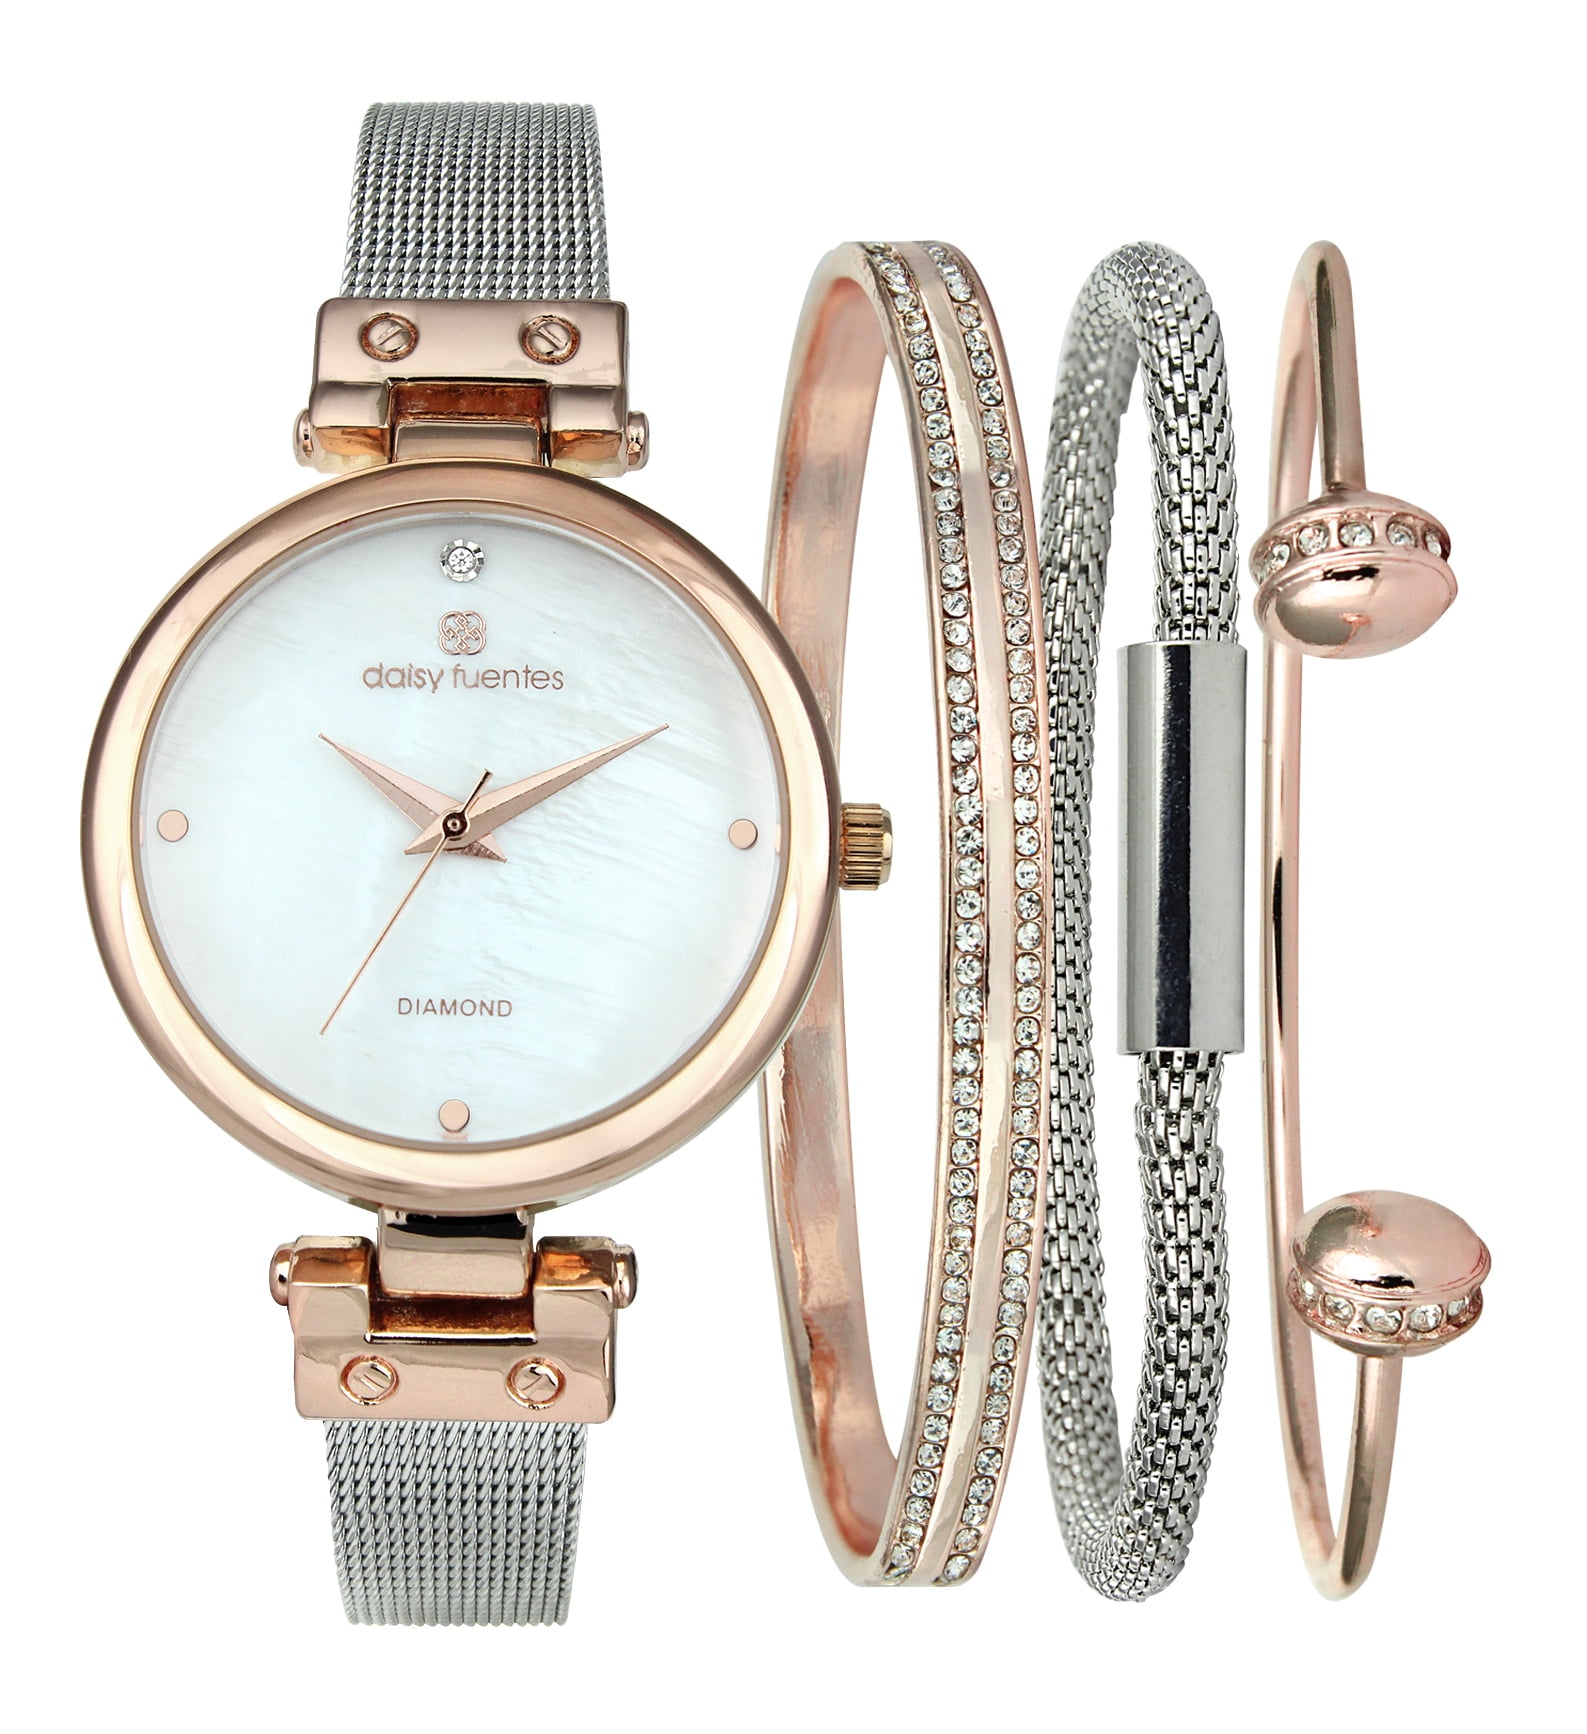 DAISY FUENTES Womens Watches Two tone Rose Gold Watch with Mesh Strap,  Quartz movement, Diamond Accent, Bracelet Set - Elegant Style and Versatile  Accessories - Perfect Gift 